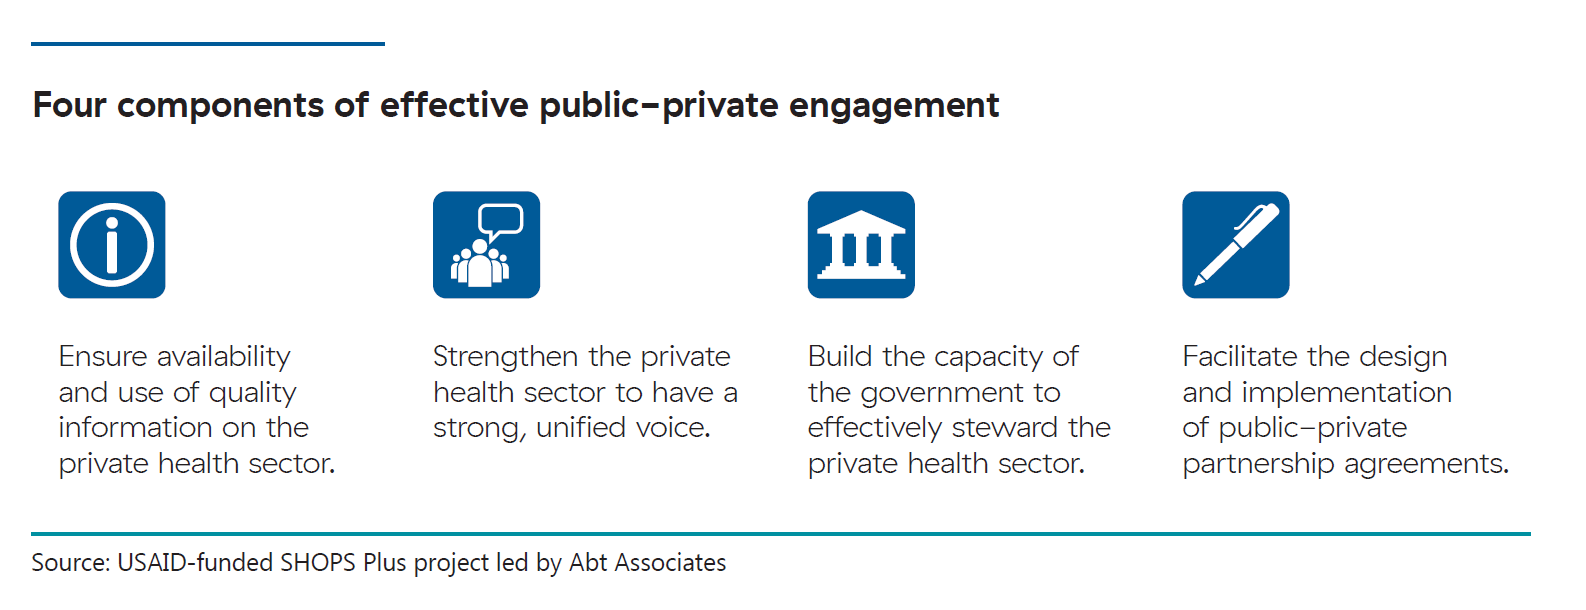 The four components of effective public-private engagement